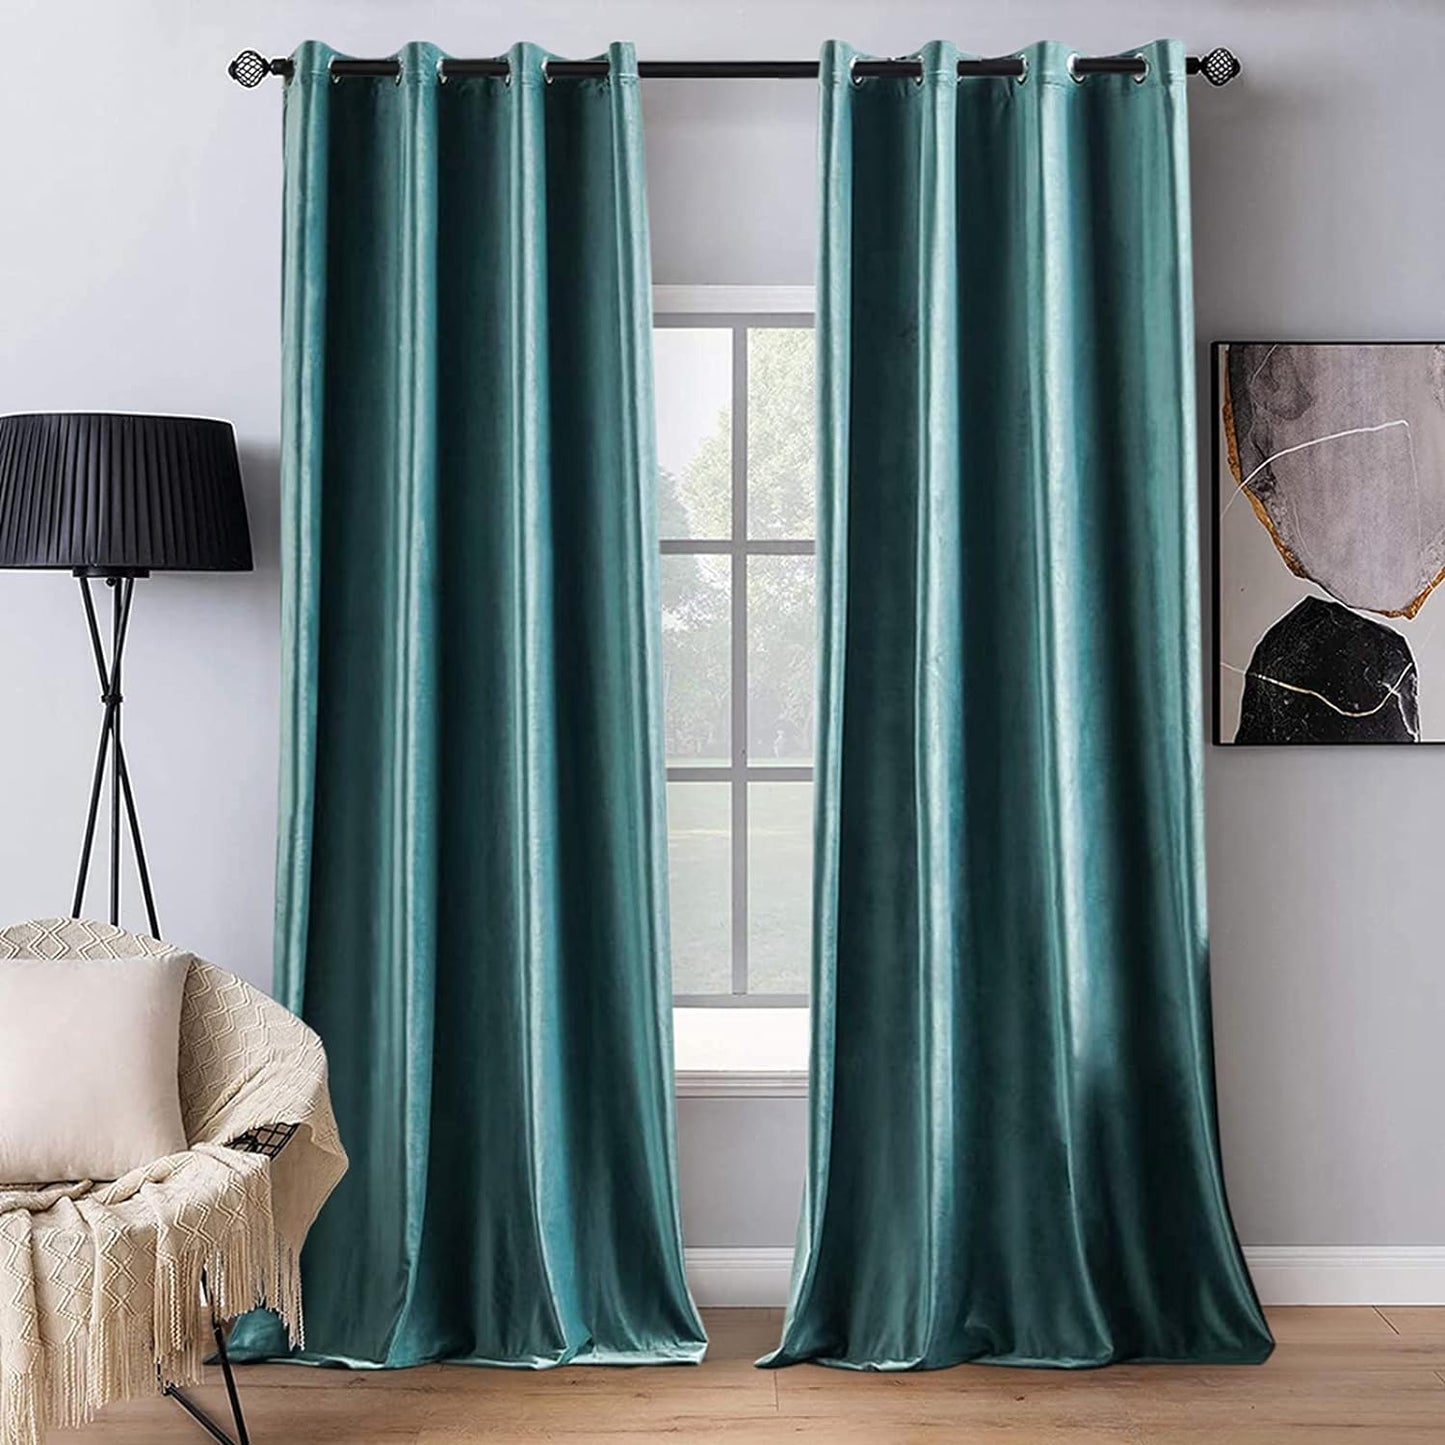 MIULEE Velvet Curtains Olive Green Elegant Grommet Curtains Thermal Insulated Soundproof Room Darkening Curtains/Drapes for Classical Living Room Bedroom Decor 52 X 84 Inch Set of 2  MIULEE Teal W52 X L96 